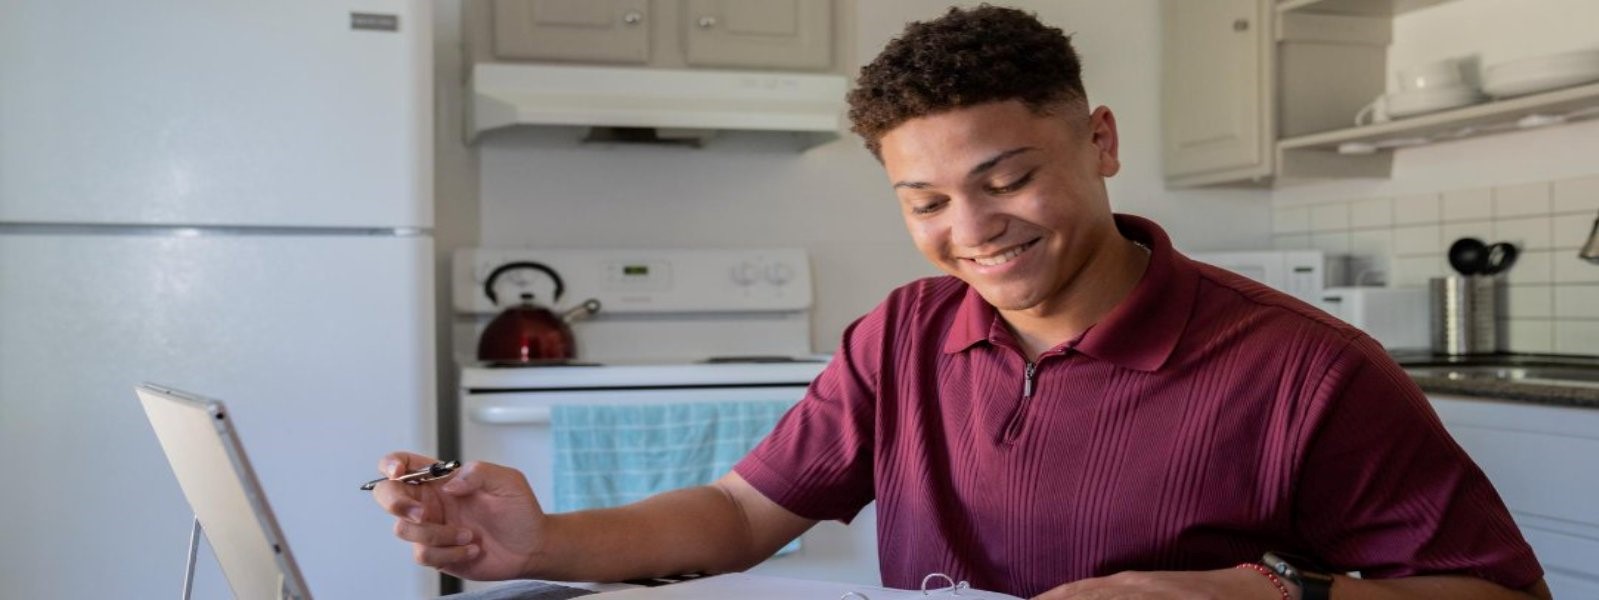 student sitting at table in kitchen in front of open laptop, smiling